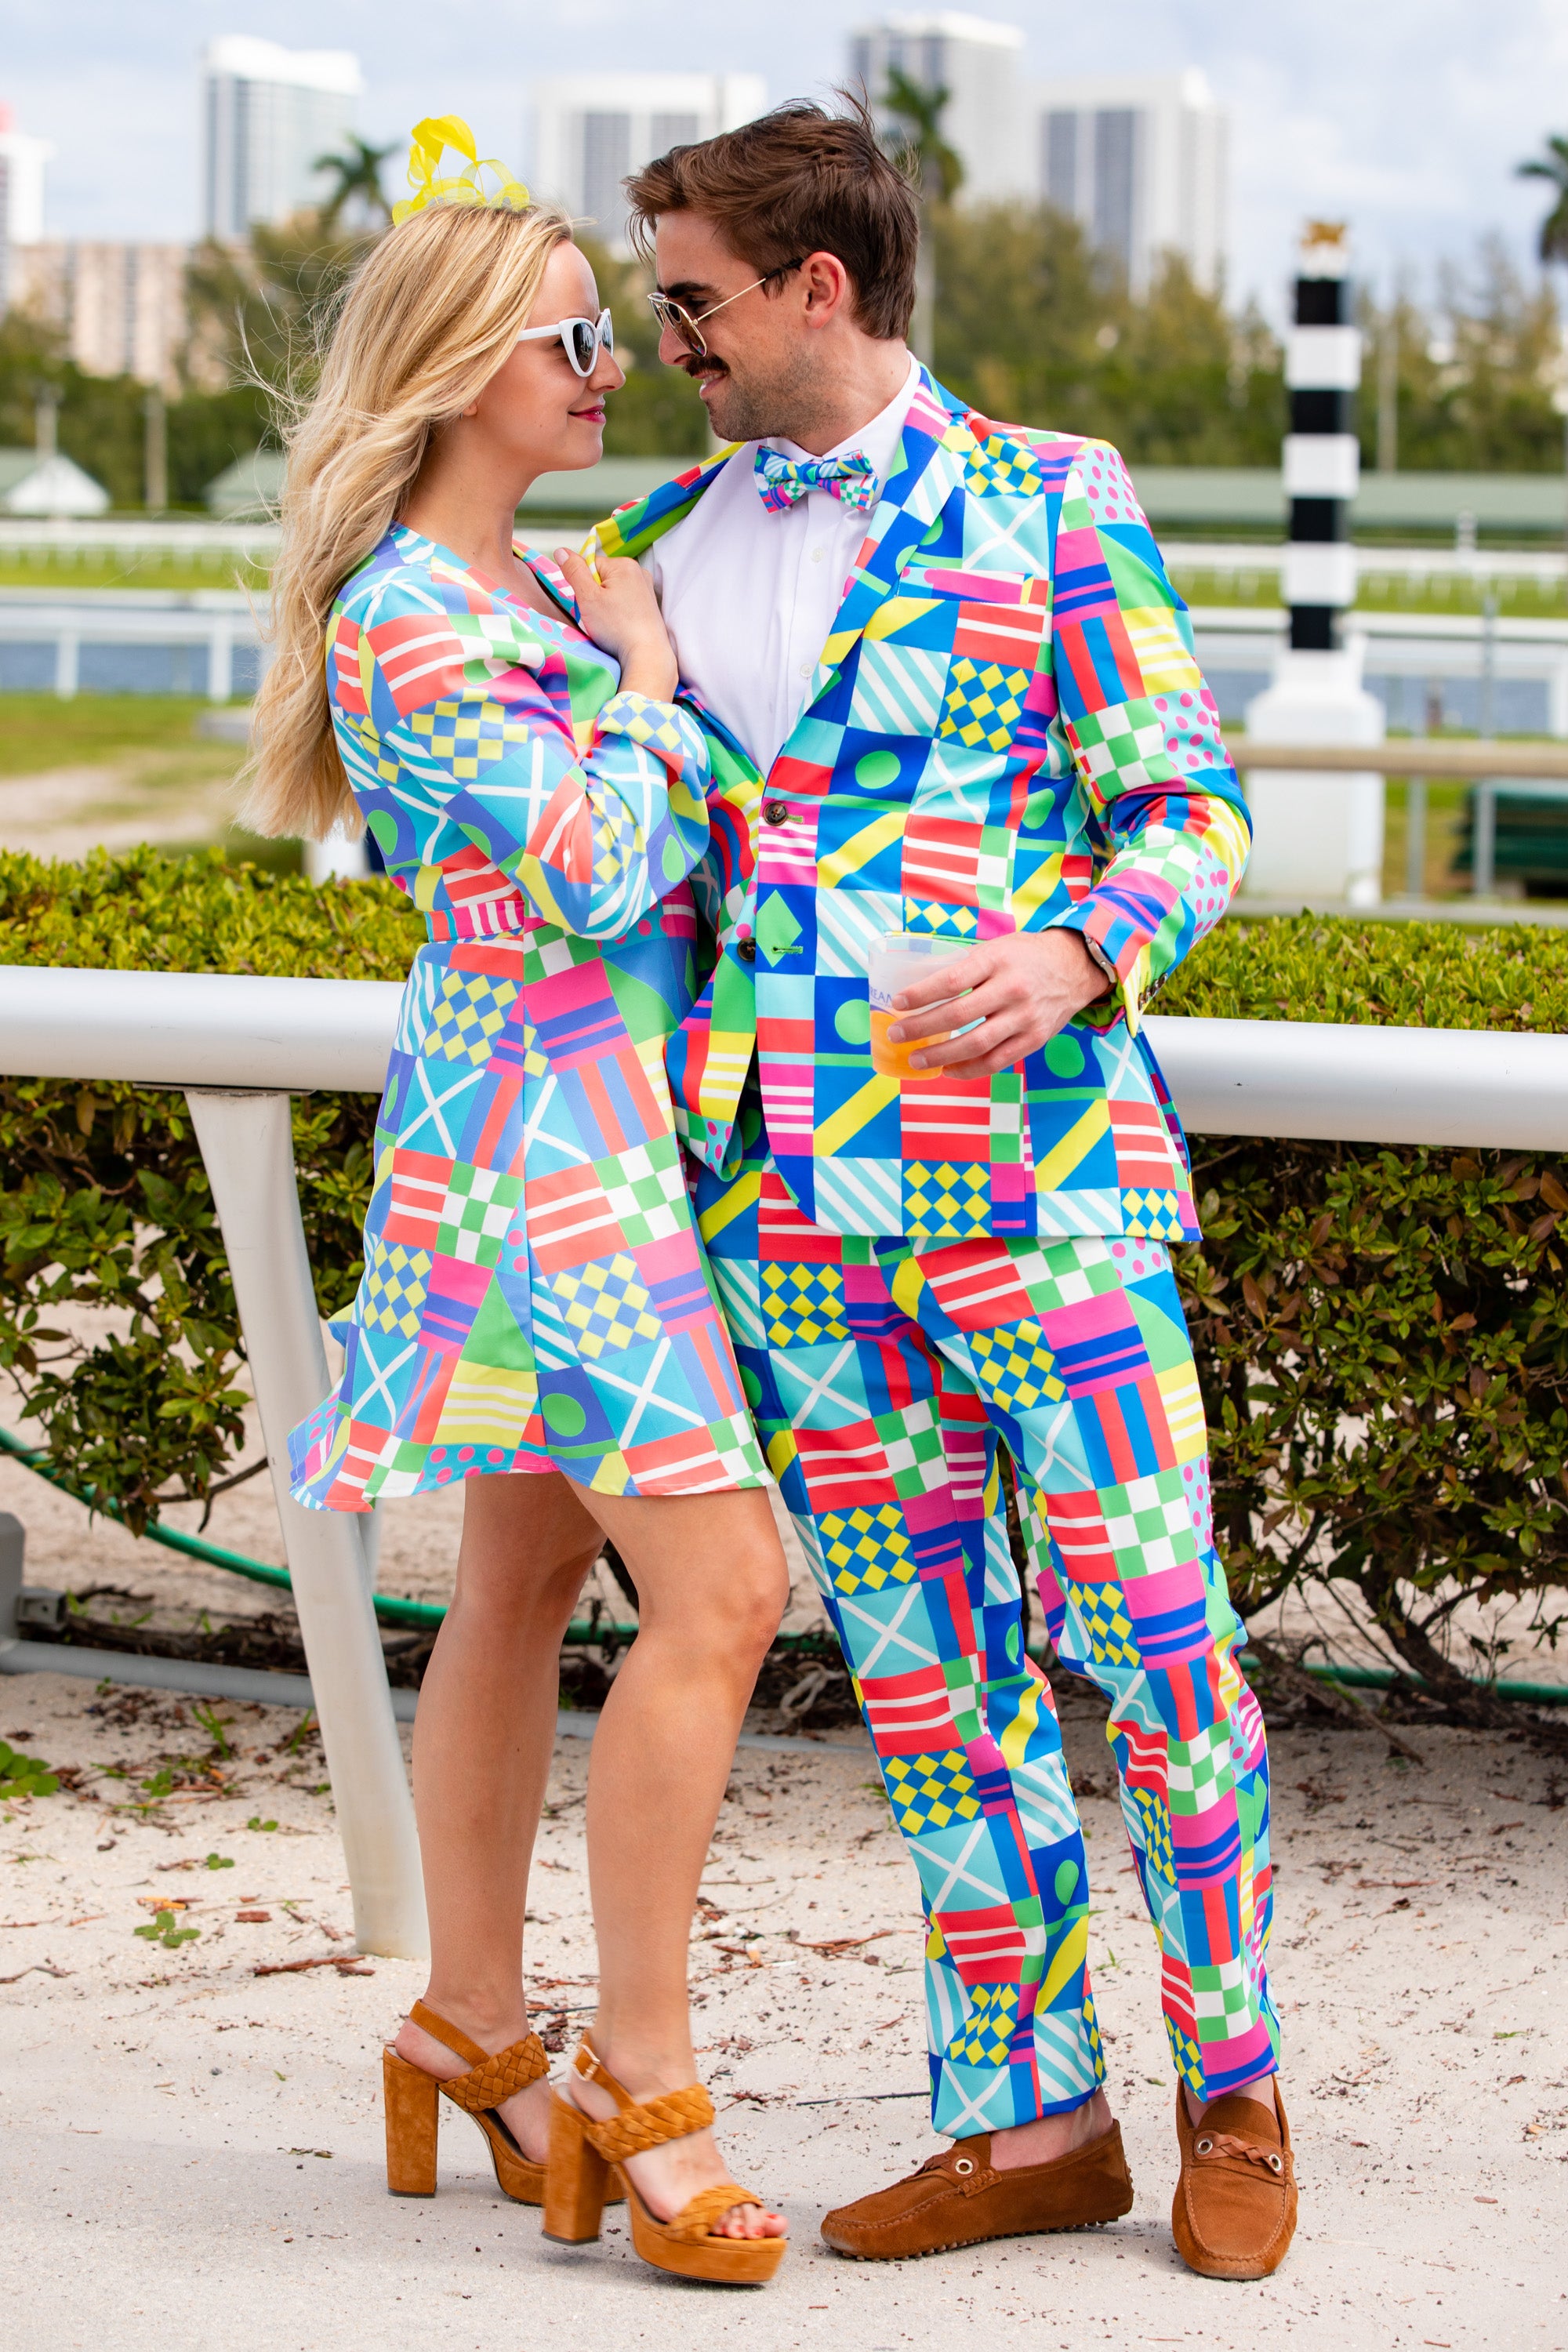 Kentucky Derby Outfits / 1 332 Kentucky Derby Fashion Photos And